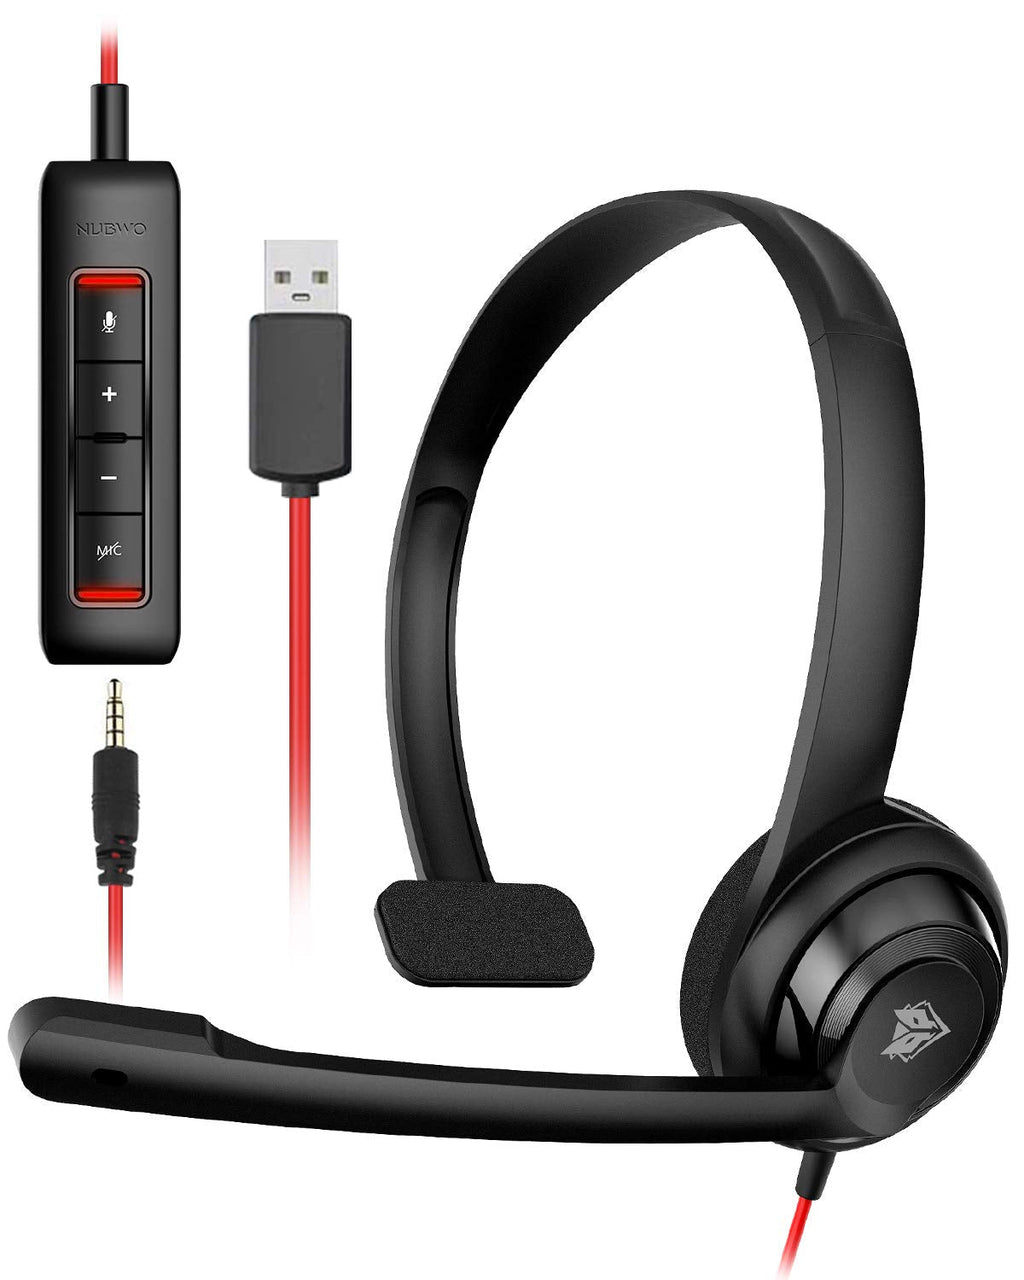 NUBWO HW02 USB Headset with Microphone,Work Headset with Mic&in-line Control, Super Light, Ultra Comfort Computer Headset for Laptop pc, On-Ear Wired Office Call Center Headset for Boom Skype Webinars Black 3.5+USB